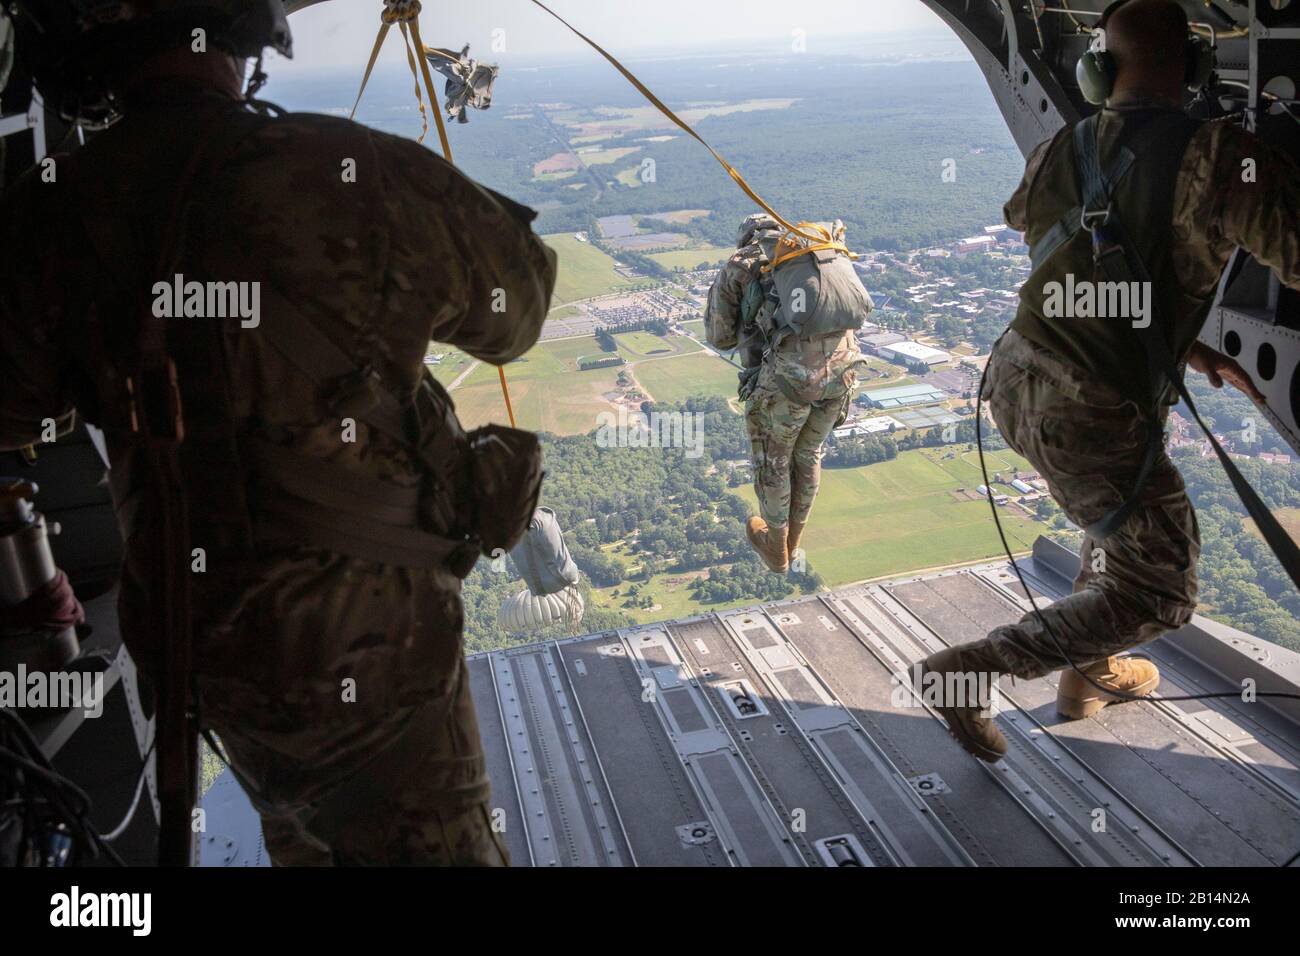 U.S. Army paratroopers, competing in an International Parachute Competition, jumping out of a CH-47 Chinook Helicopter onto Castle Drop Zone during Leapfest 2019 at West Kingston, Rhode Island, August 5, 2019. Leapfest is the largest, longest standing, international static line parachute training event and competition hosted by the 56th Troop Command, Rhode Island Army National Guard to promote high level technical training and esprit de corps within the International Airborne community. (U.S. Army photo by Sgt. Sgt. Rafael DiCristina) Stock Photo